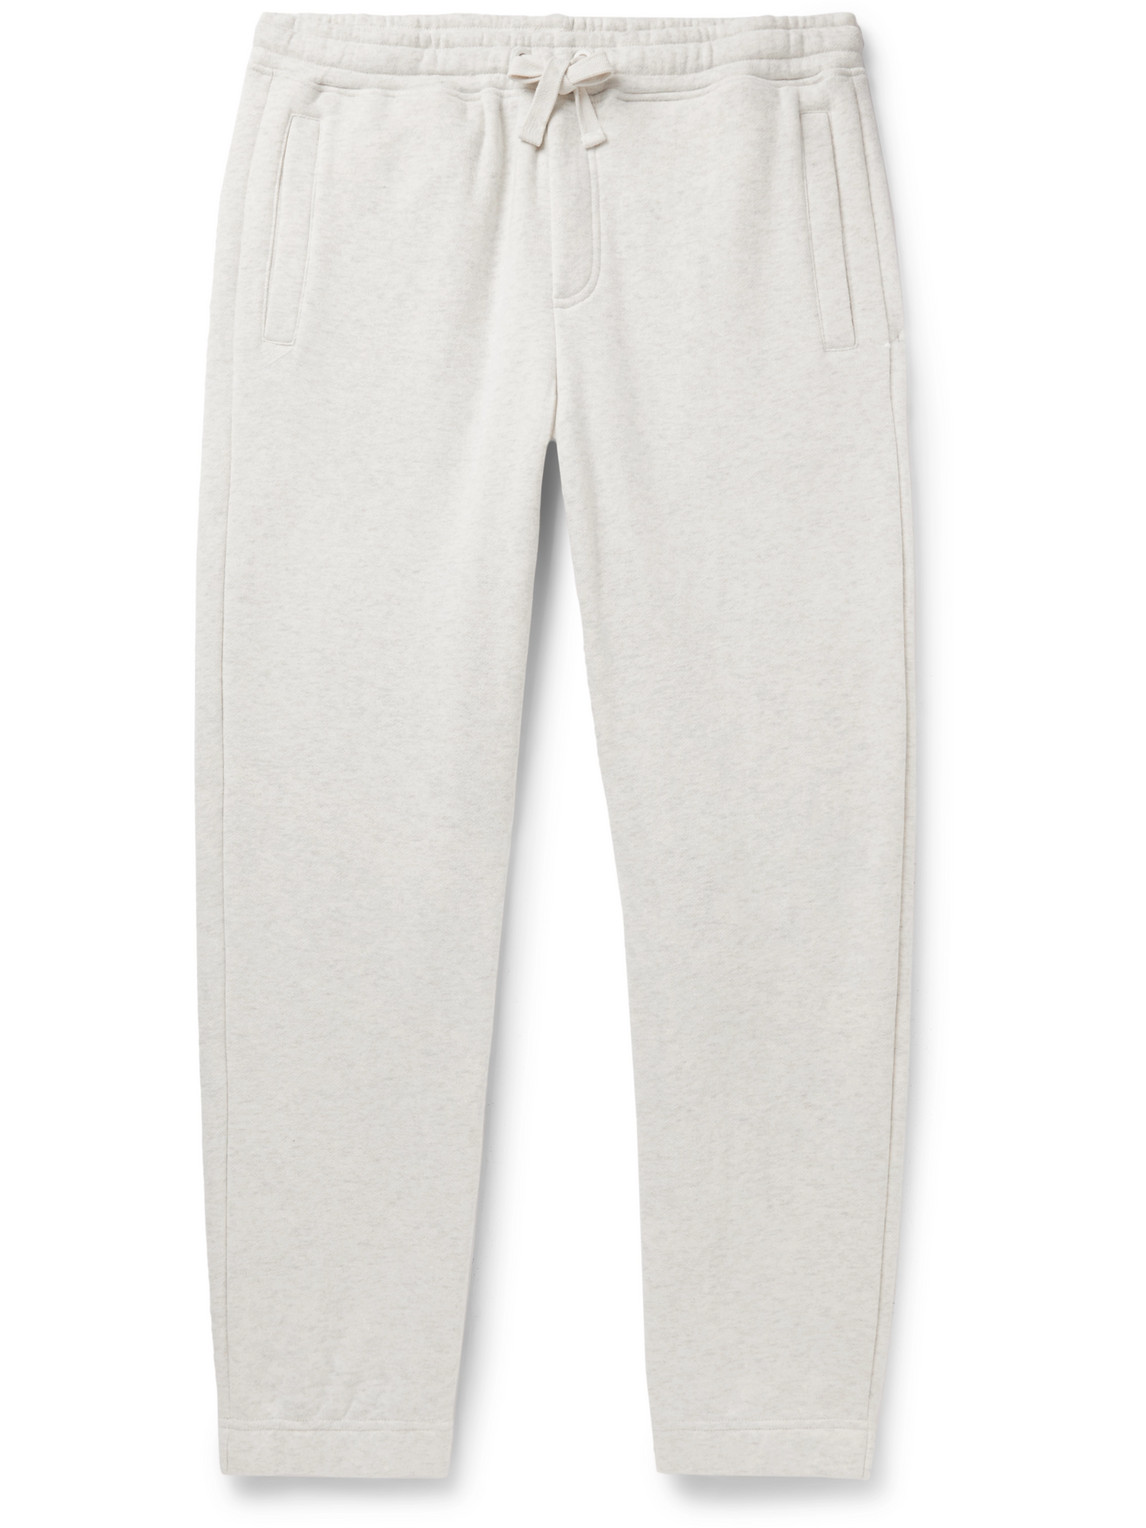 NN07 Tapered Cotton-Blend Jersey Sweatpants